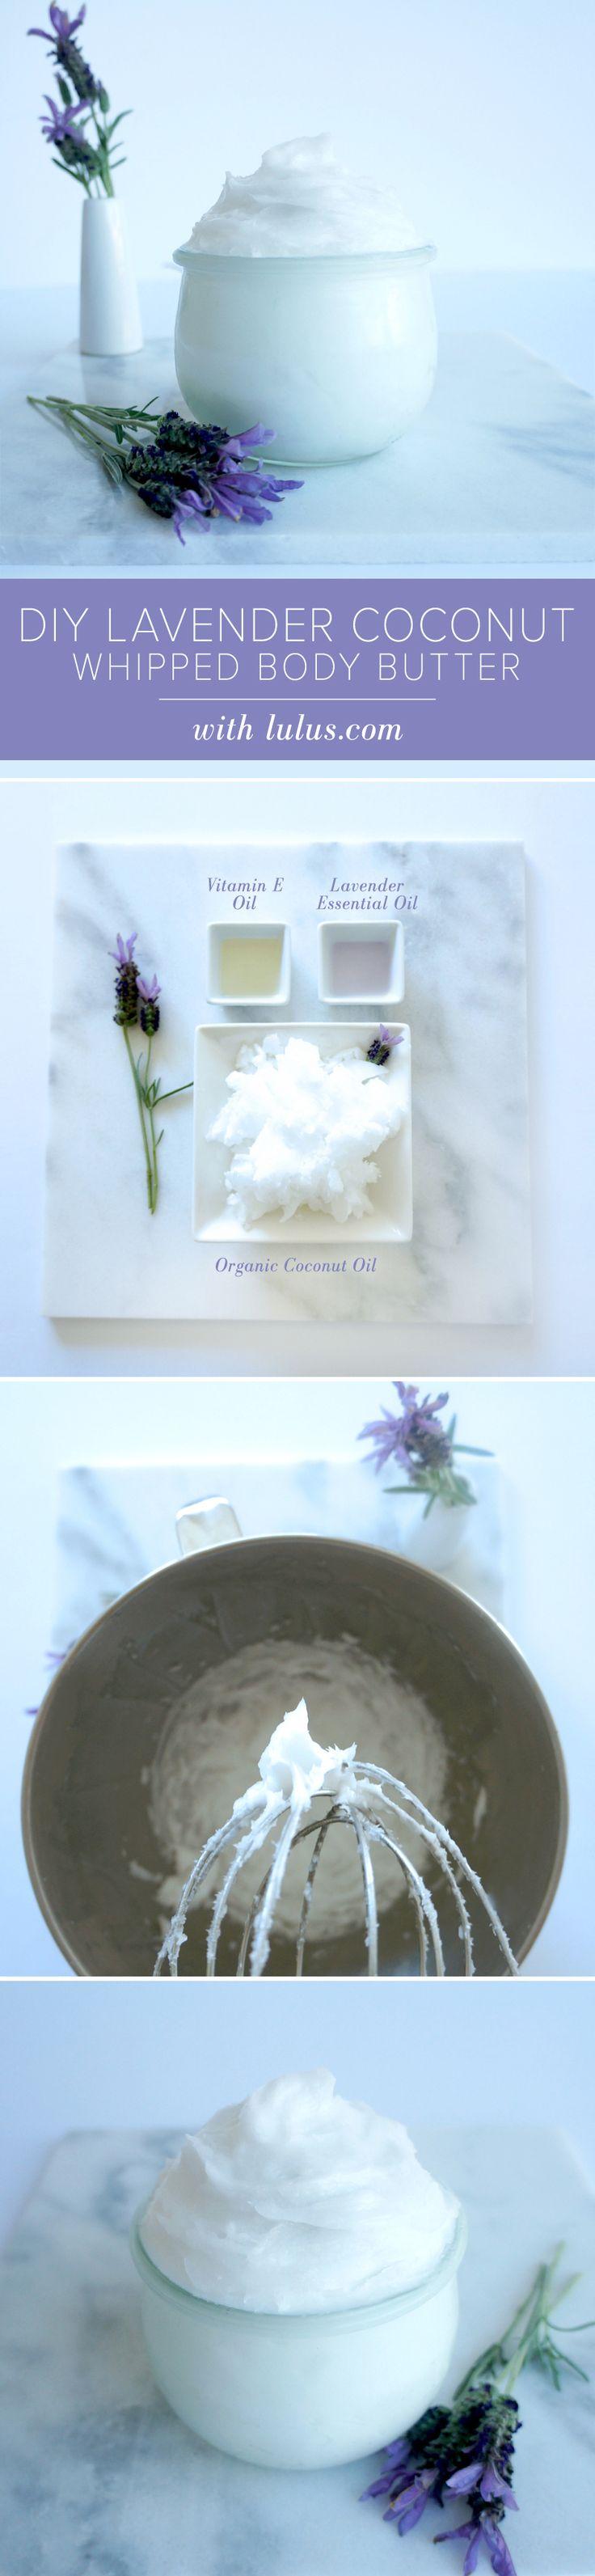 Wedding - DIY Lavender Coconut Whipped Body Butter